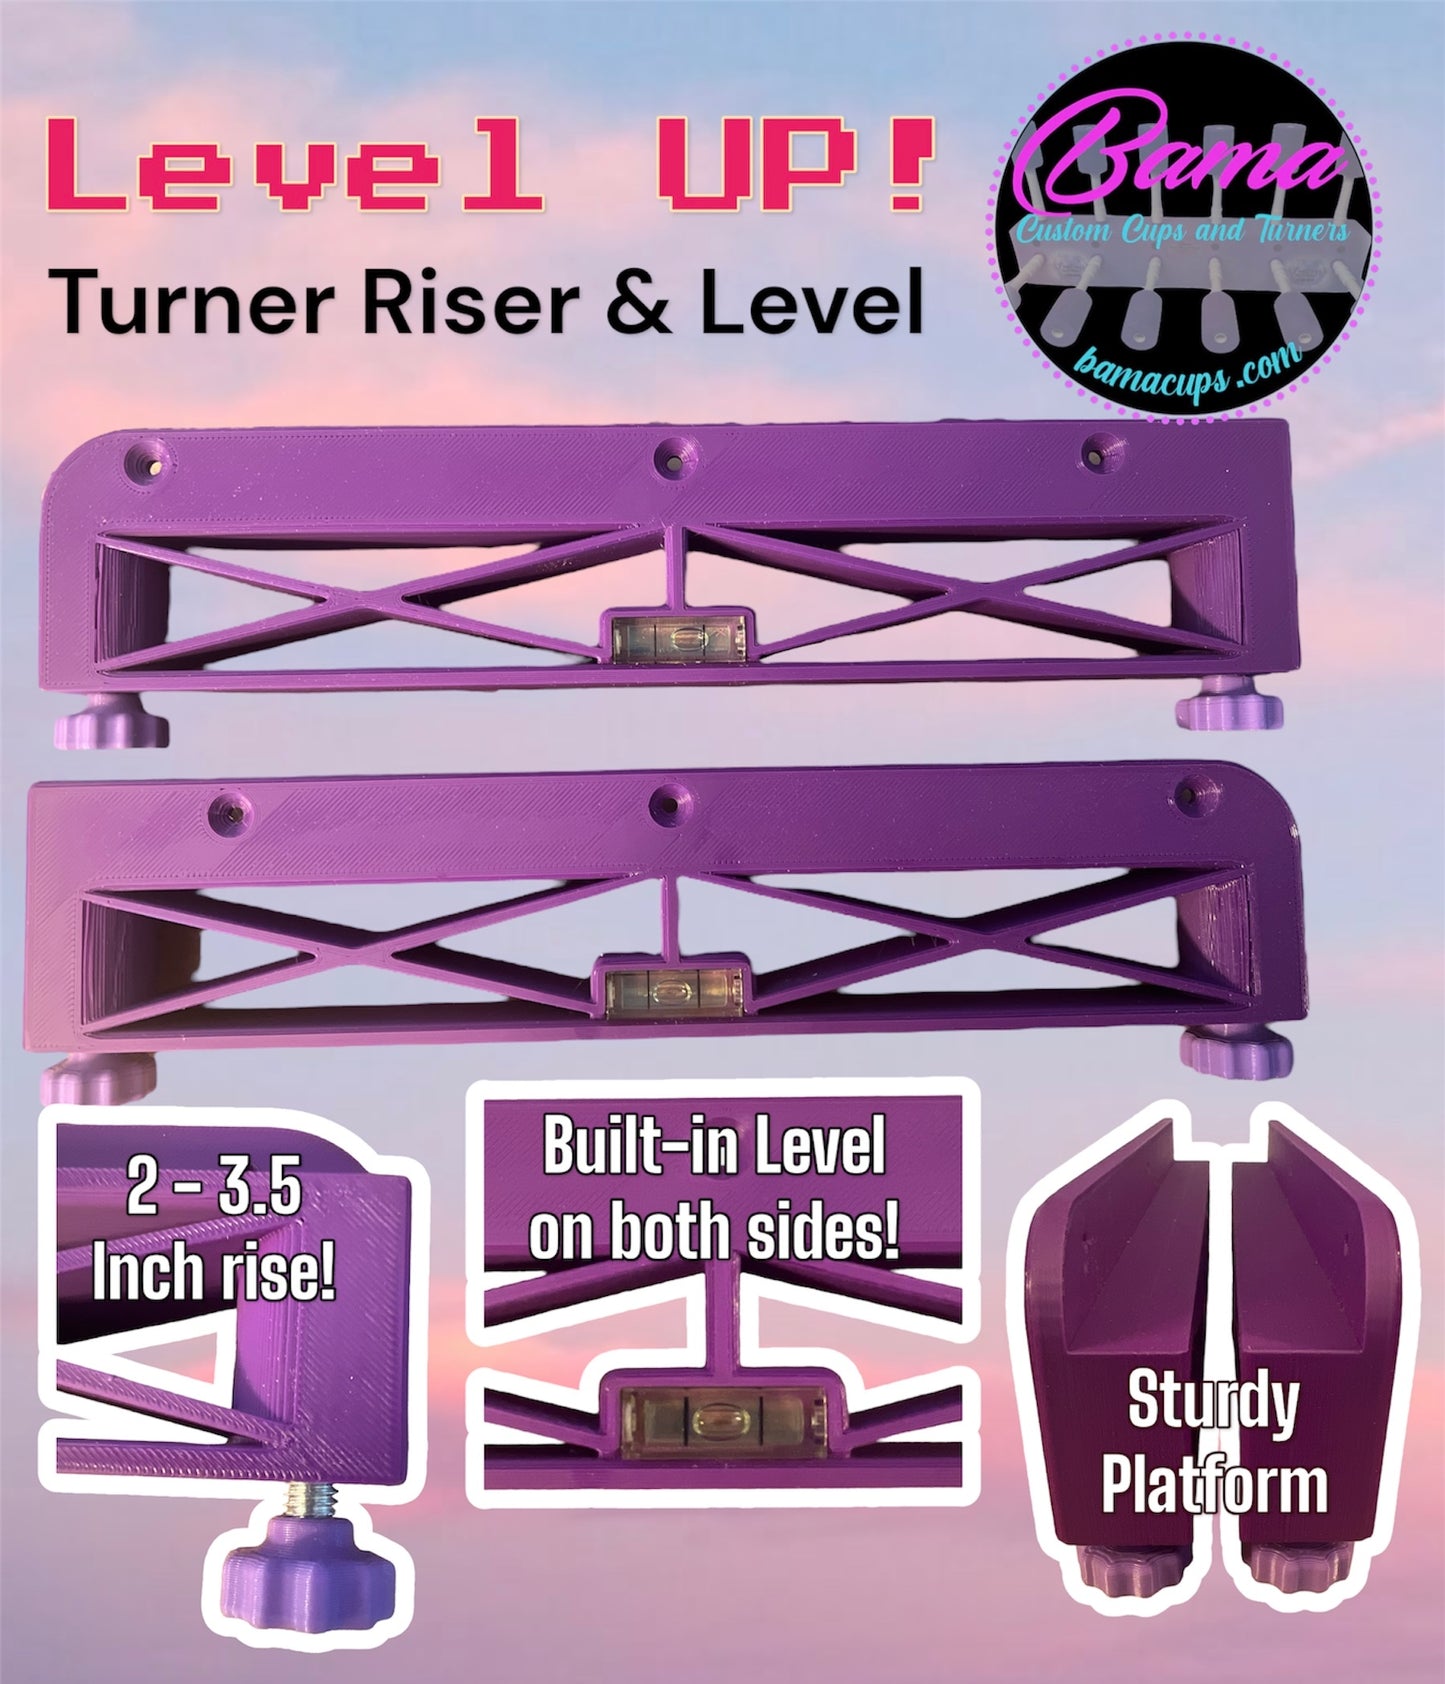 The "Level UP ⬆️" Turner Riser and Level